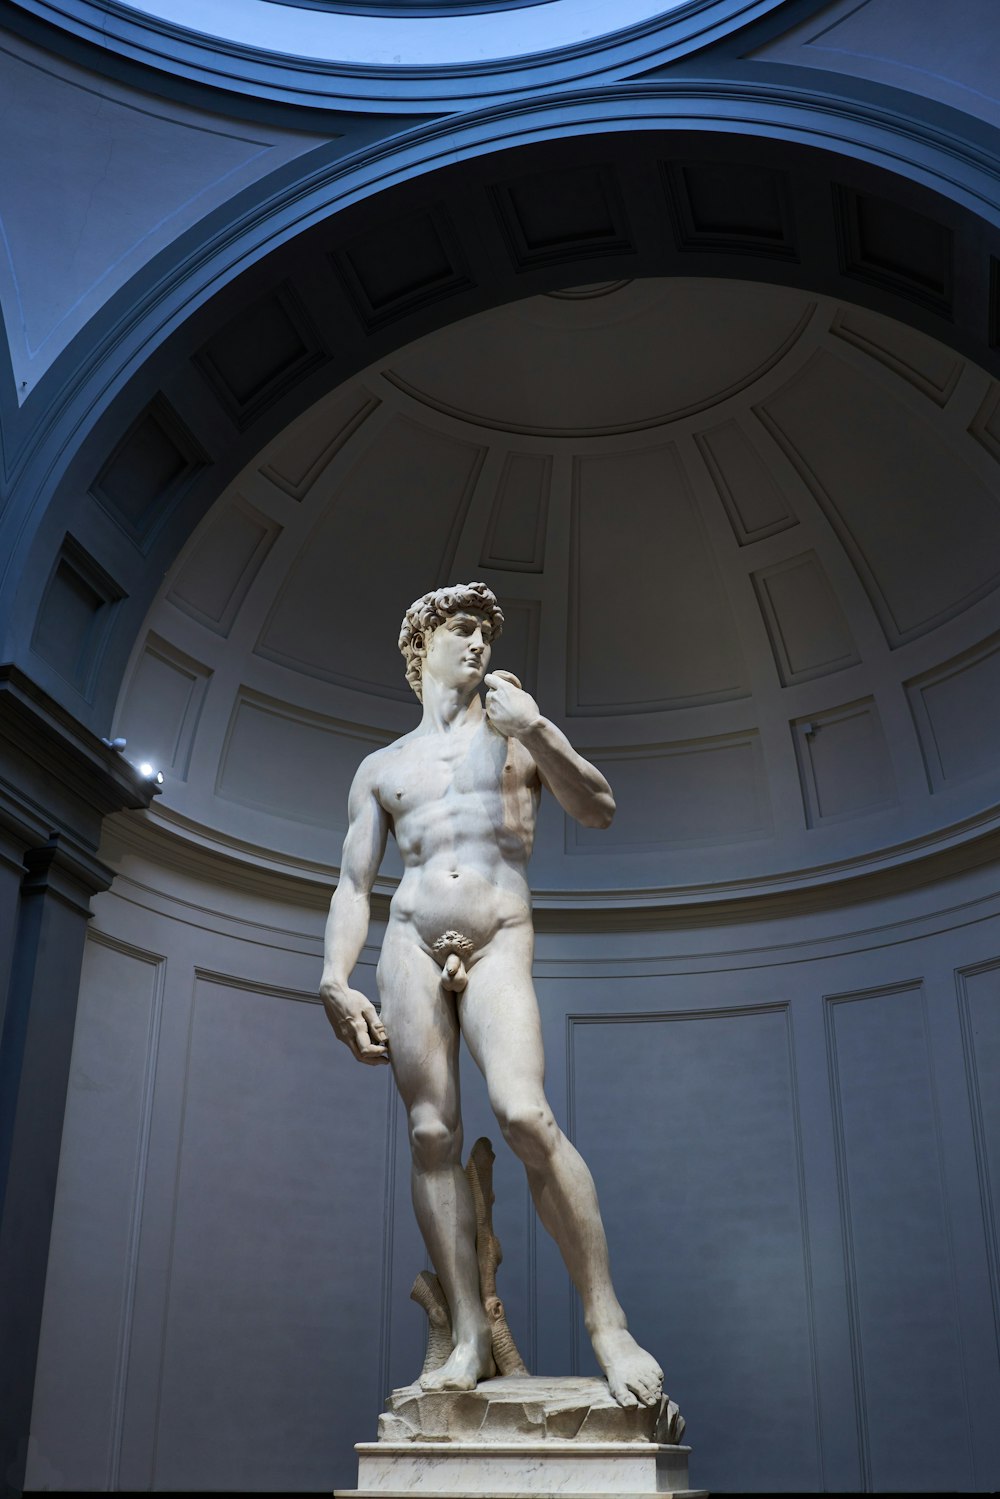 a statue of a man holding a sword